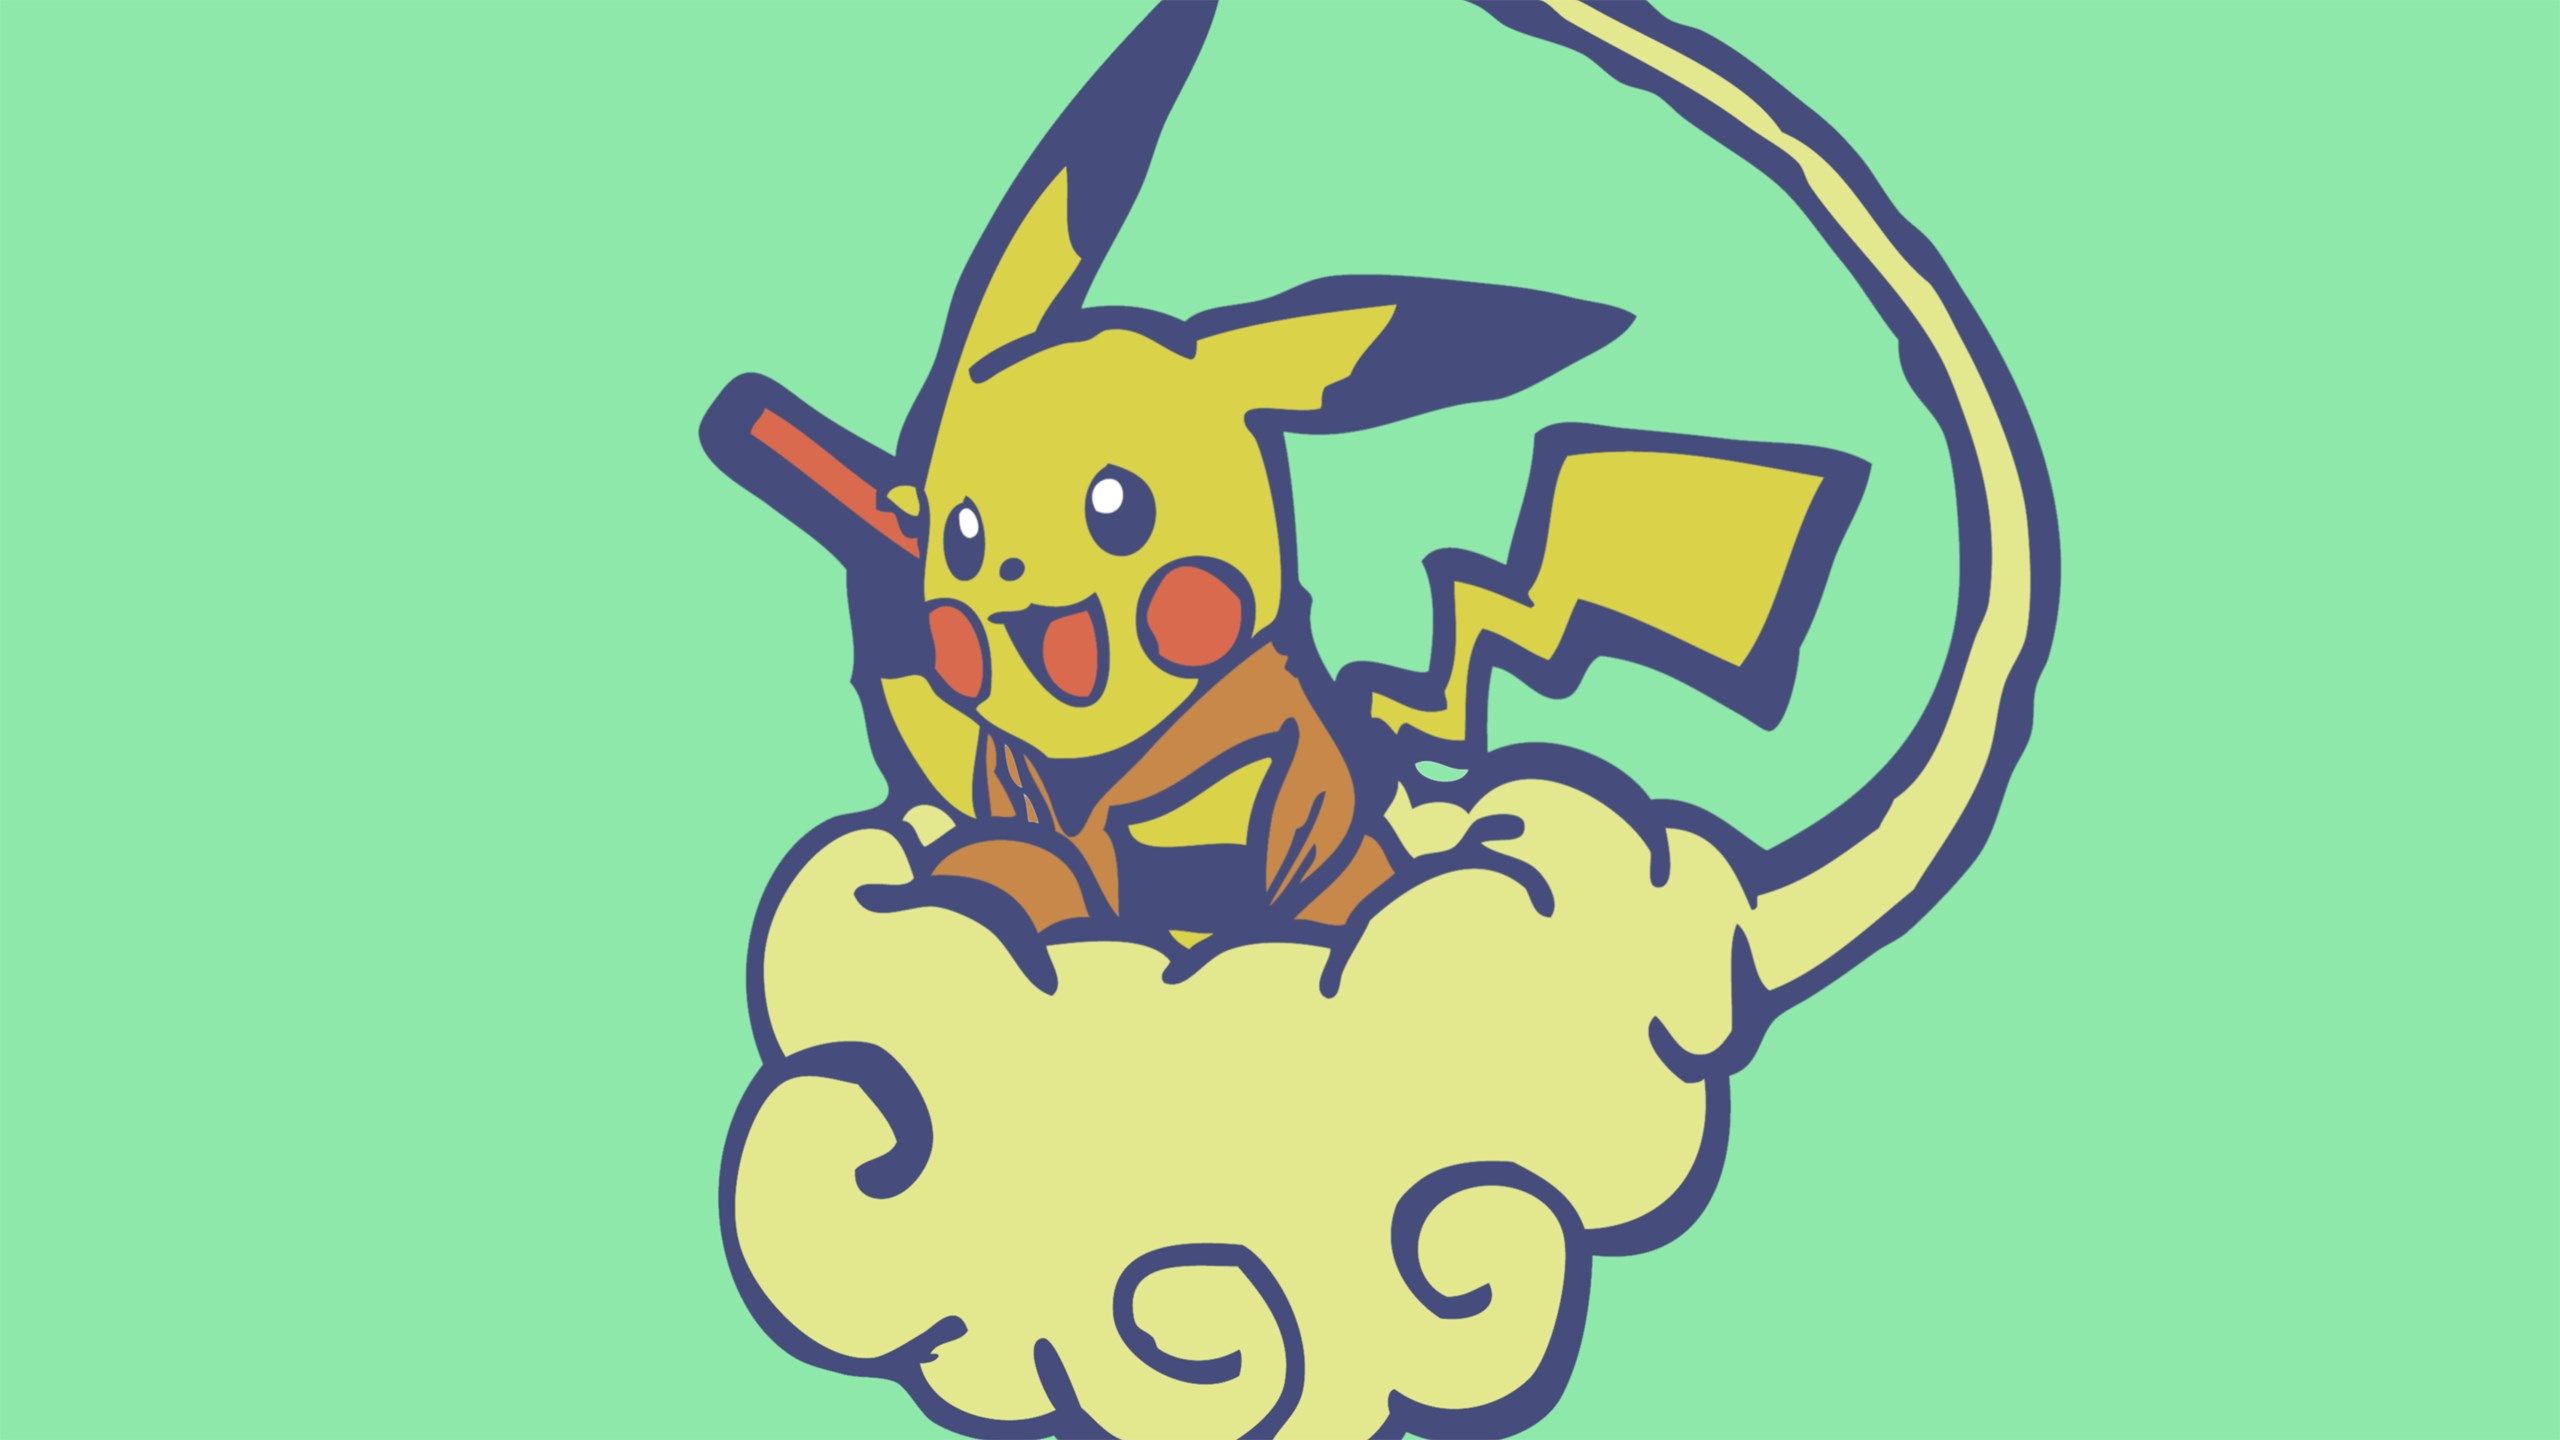 A cartoon pokemon character is sitting on top of the cloud - Pikachu, 2560x1440, Pokemon